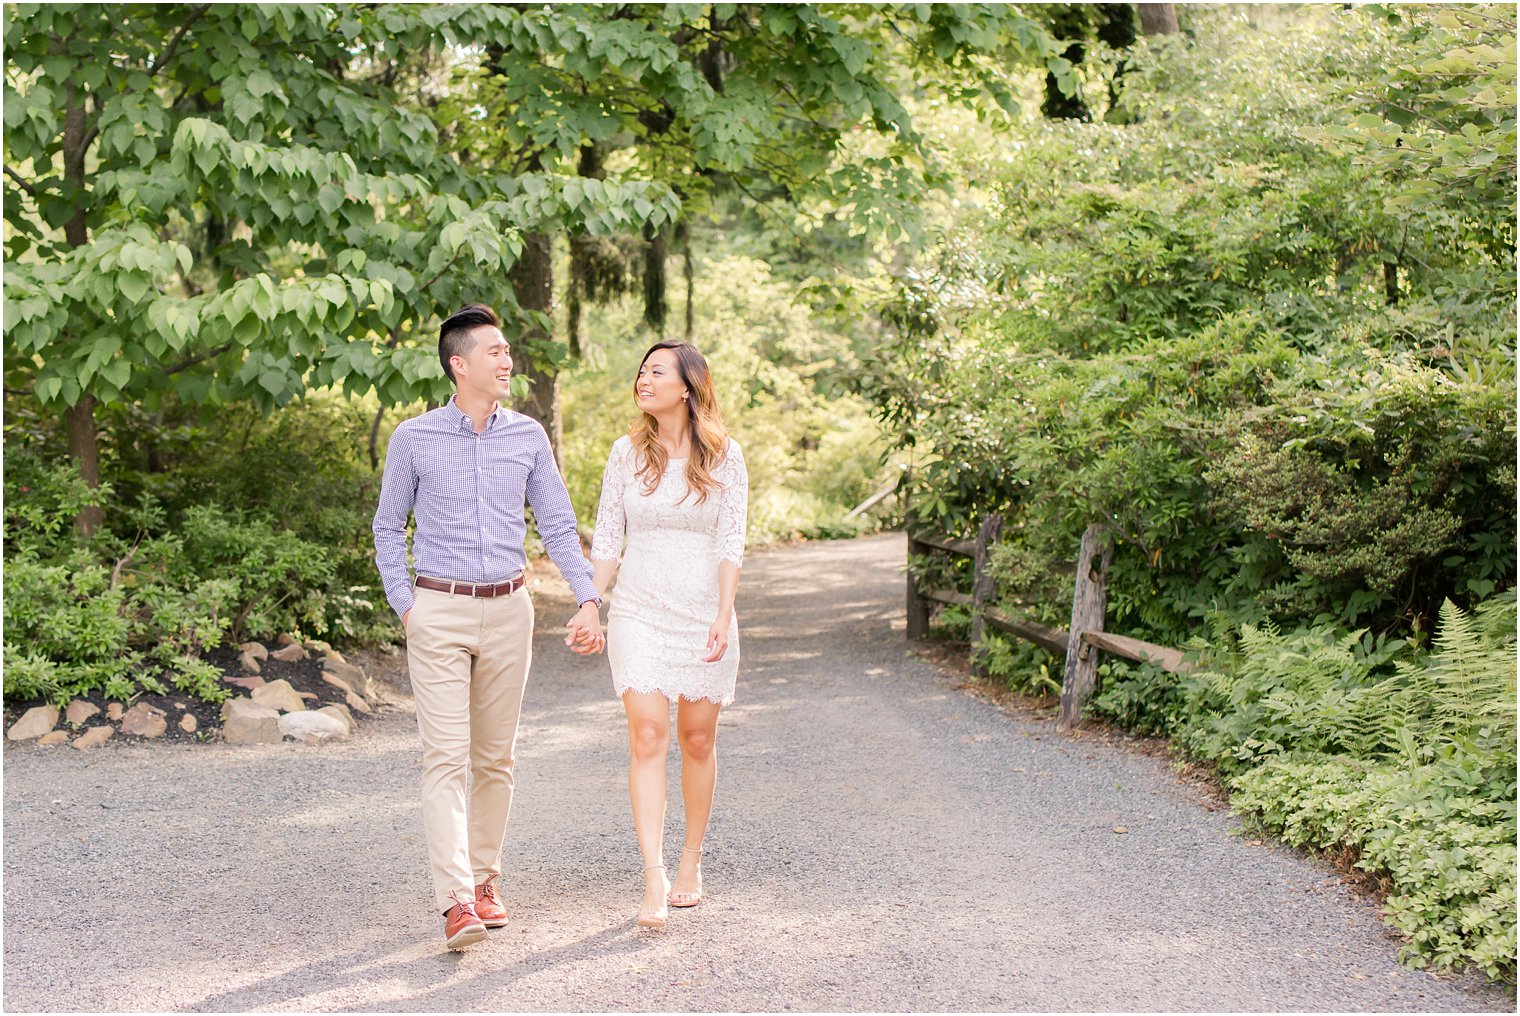 Sayen House and Gardens engagement session photographed by Idalia Photography associate photographer Jocelyn